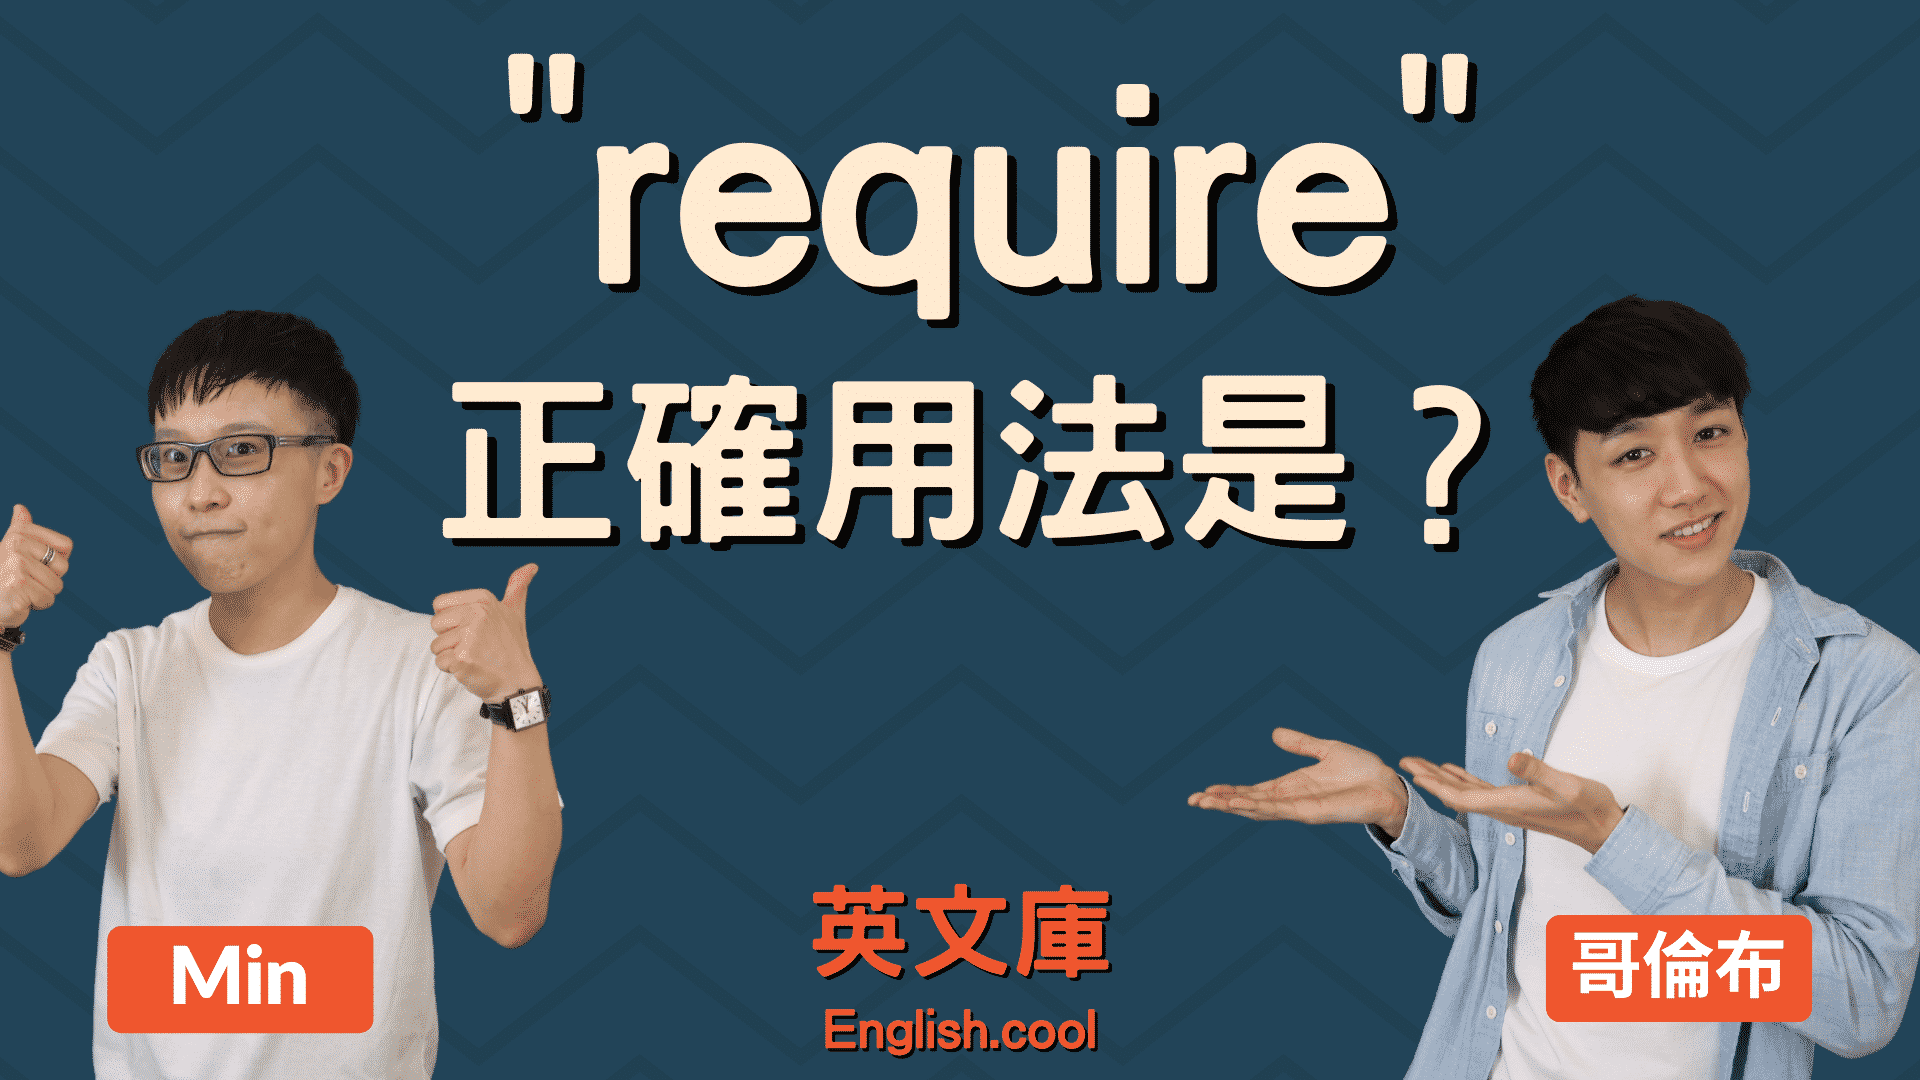 You are currently viewing 「require 」正確用法是？看例句一次搞懂！